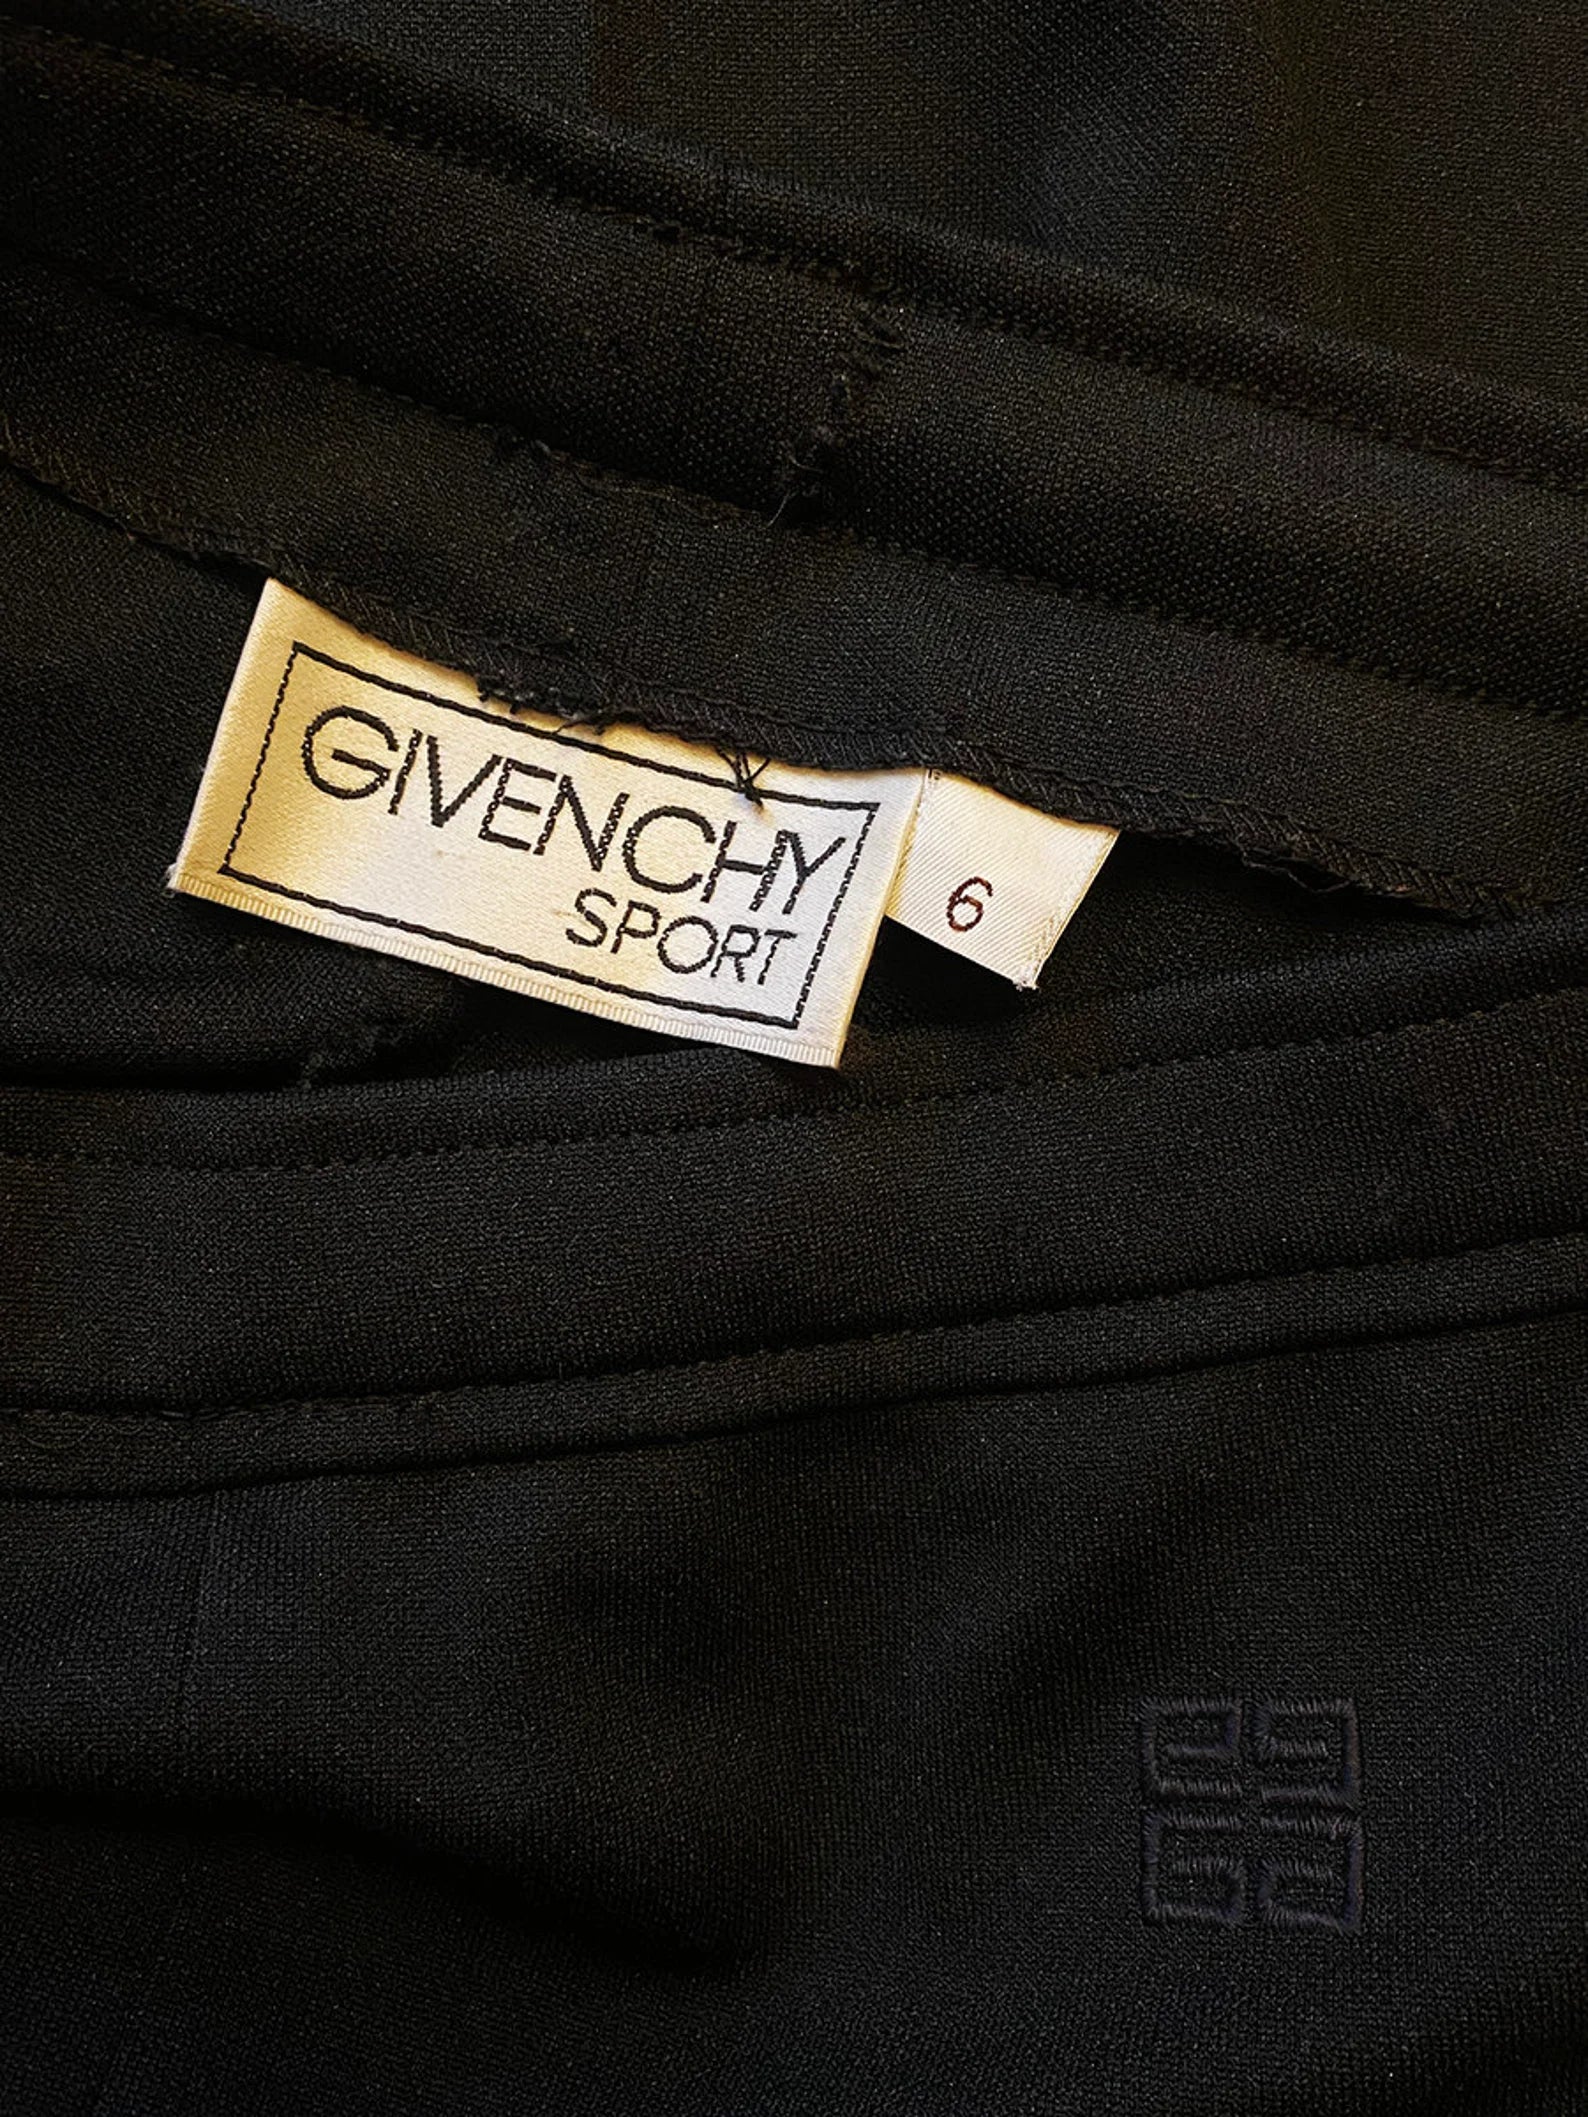 Givenchy Sport Trousers 26x26